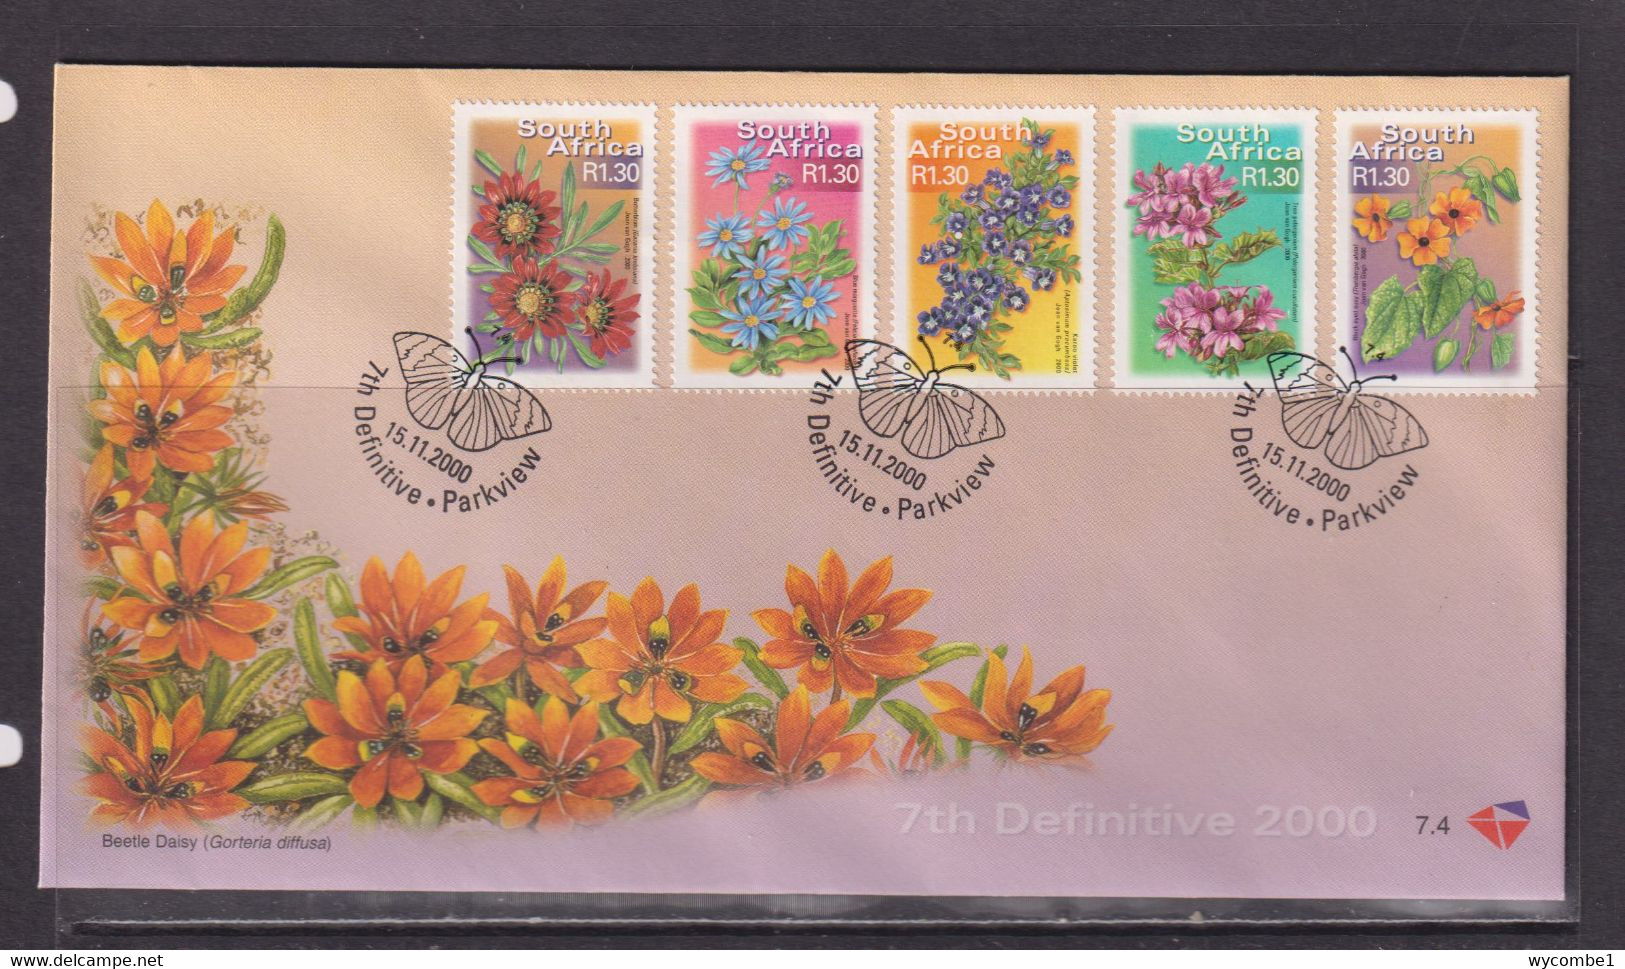 SOUTH AFRICA - 2000 Flowers 1r30 Definitive FDC - Storia Postale